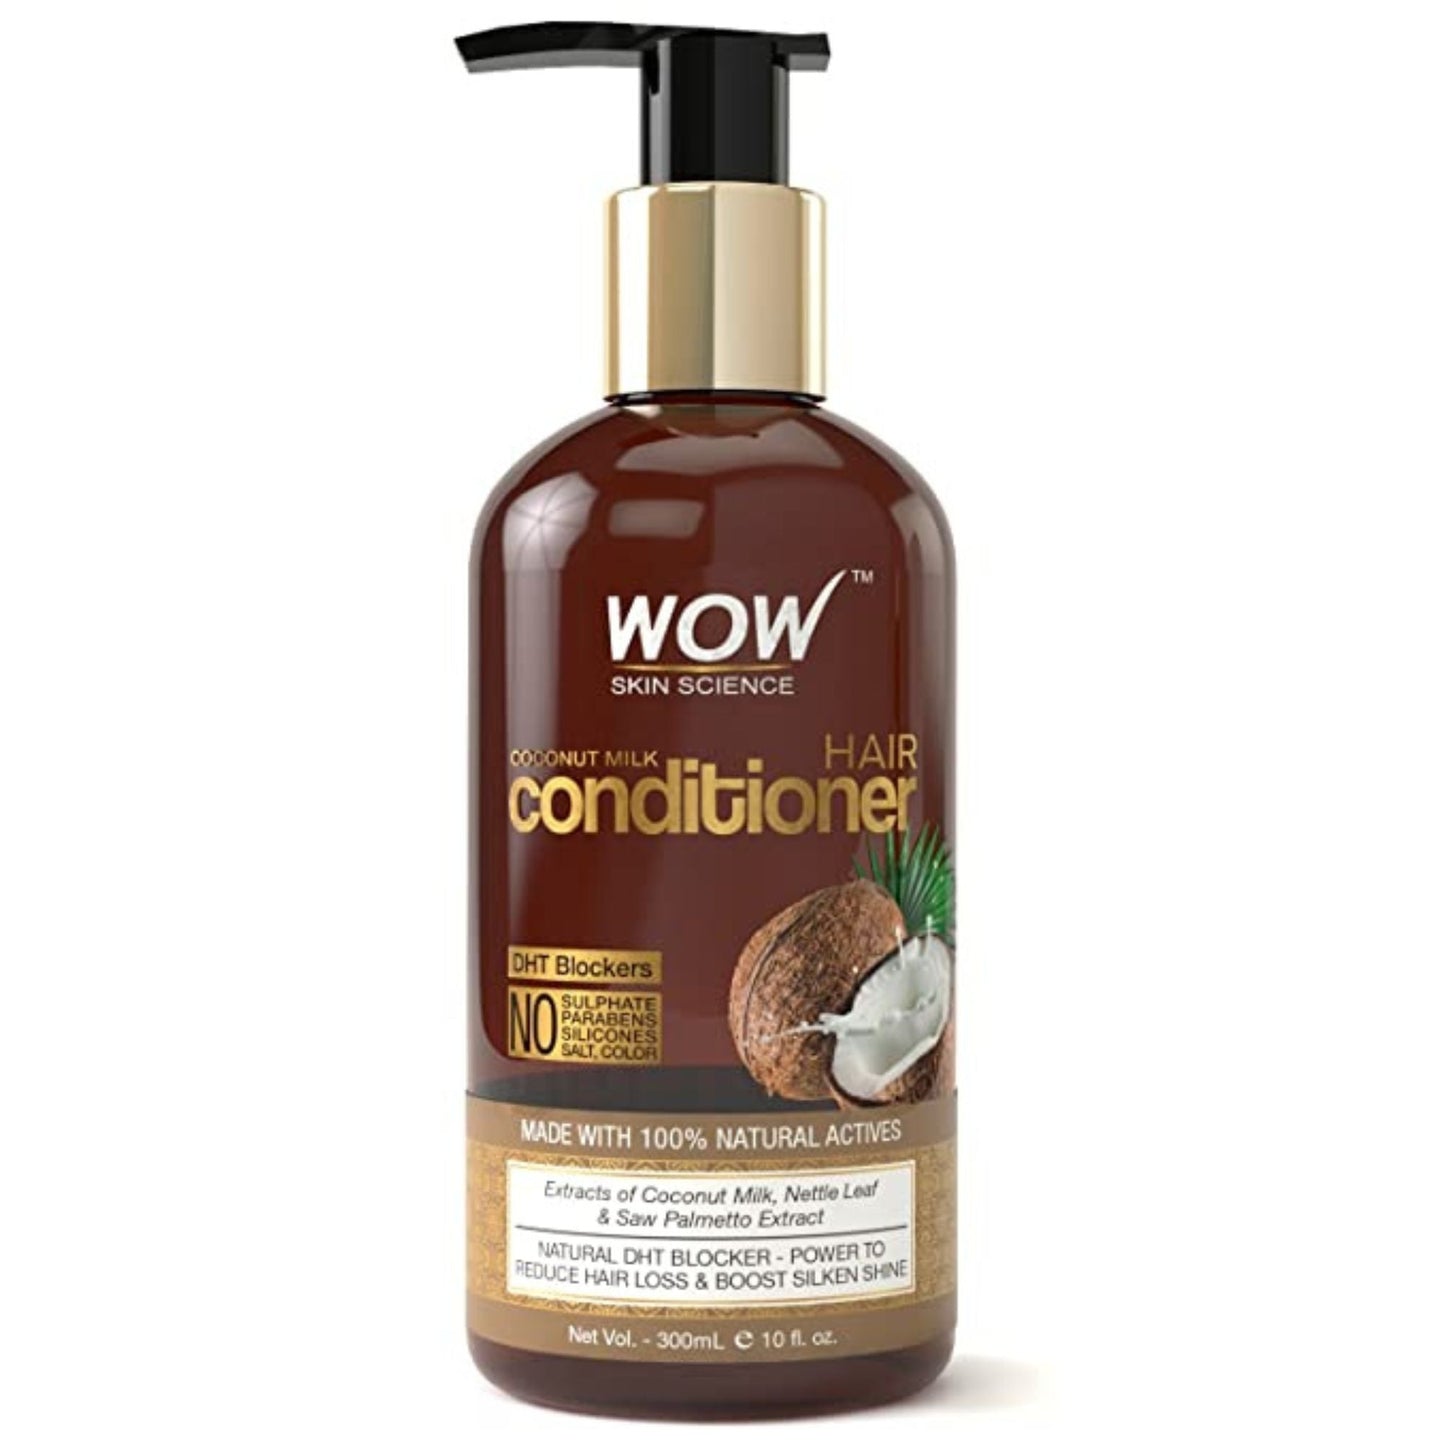 WOW Skin Science Coconut Milk Conditioner For Dry/Frizzy Hair, Hair Fall/Growth/Damage -With Dht Blockers